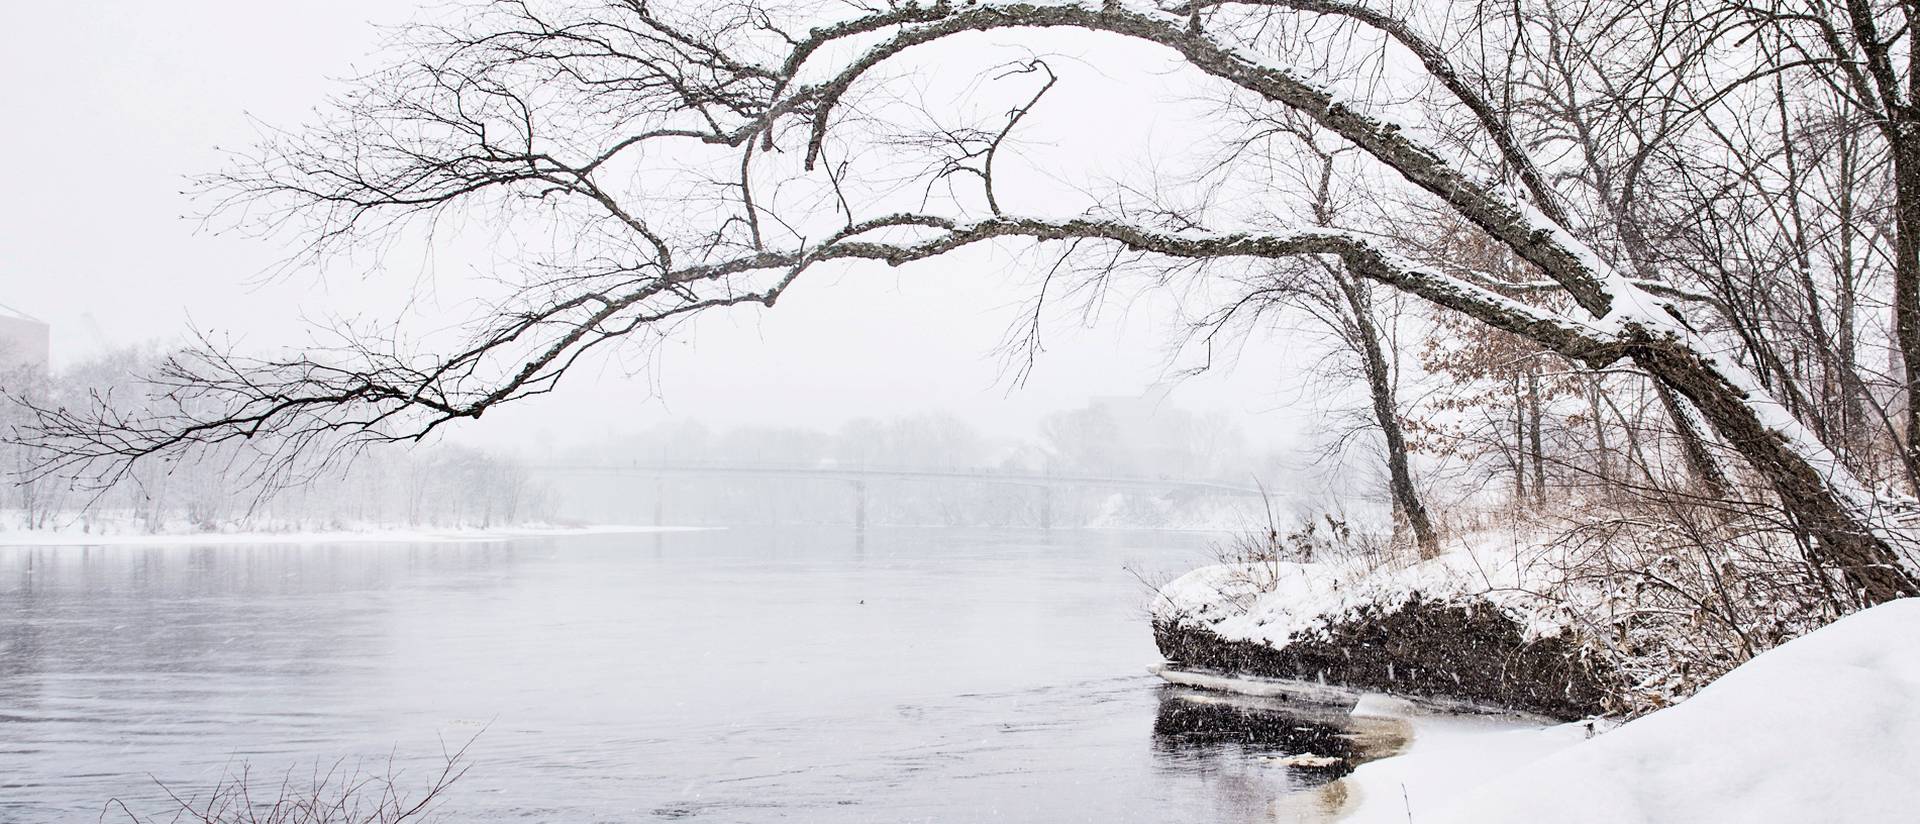 Snowy tree hanging over the Chippewa River